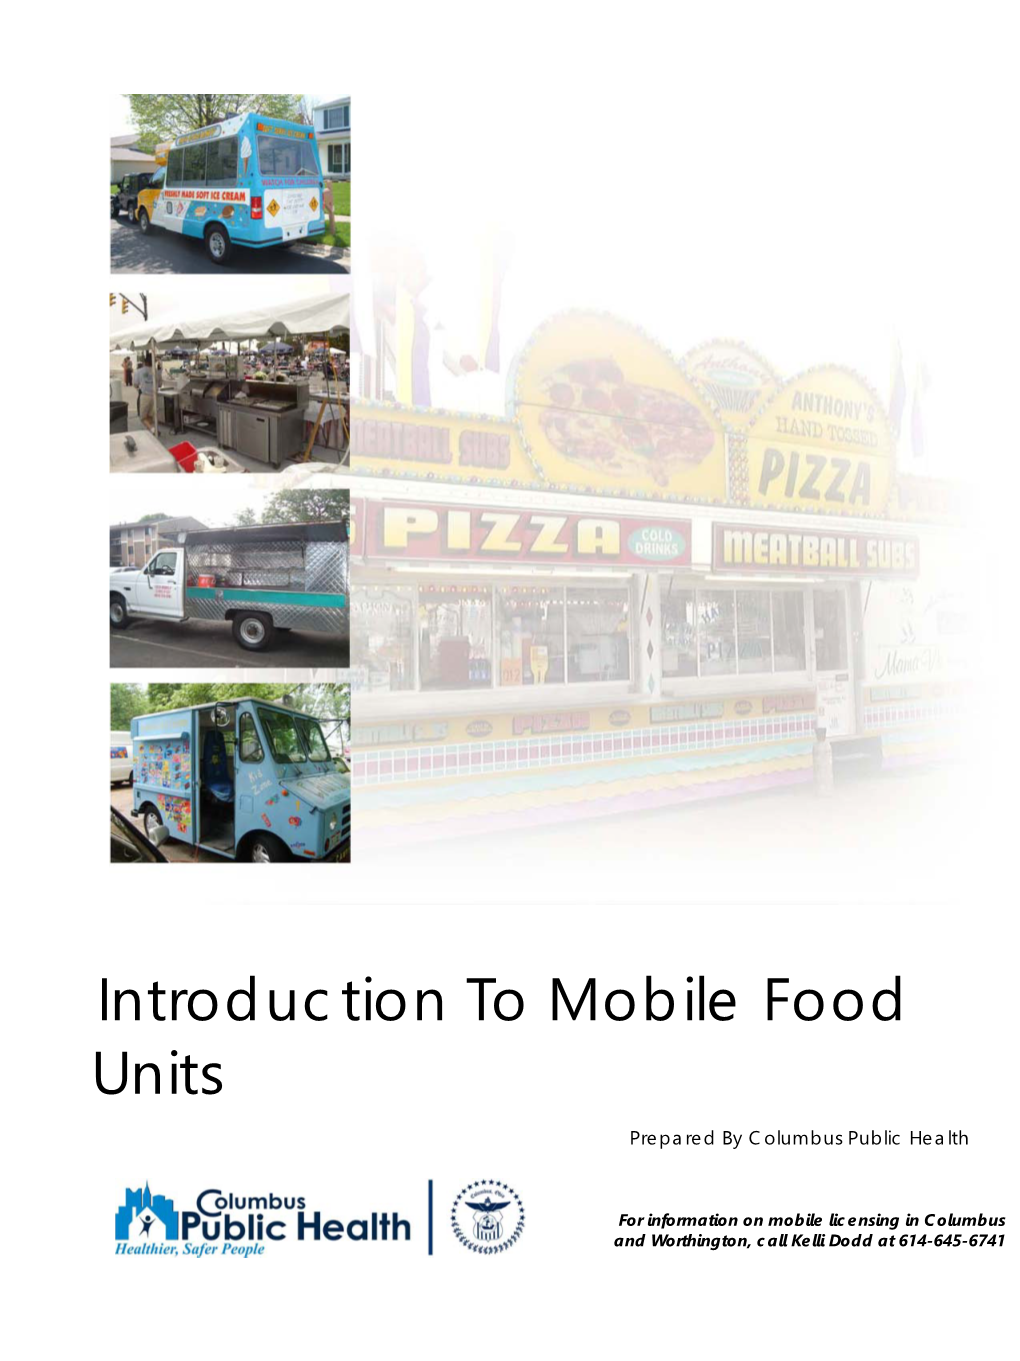 Introduction to Mobile Food Units